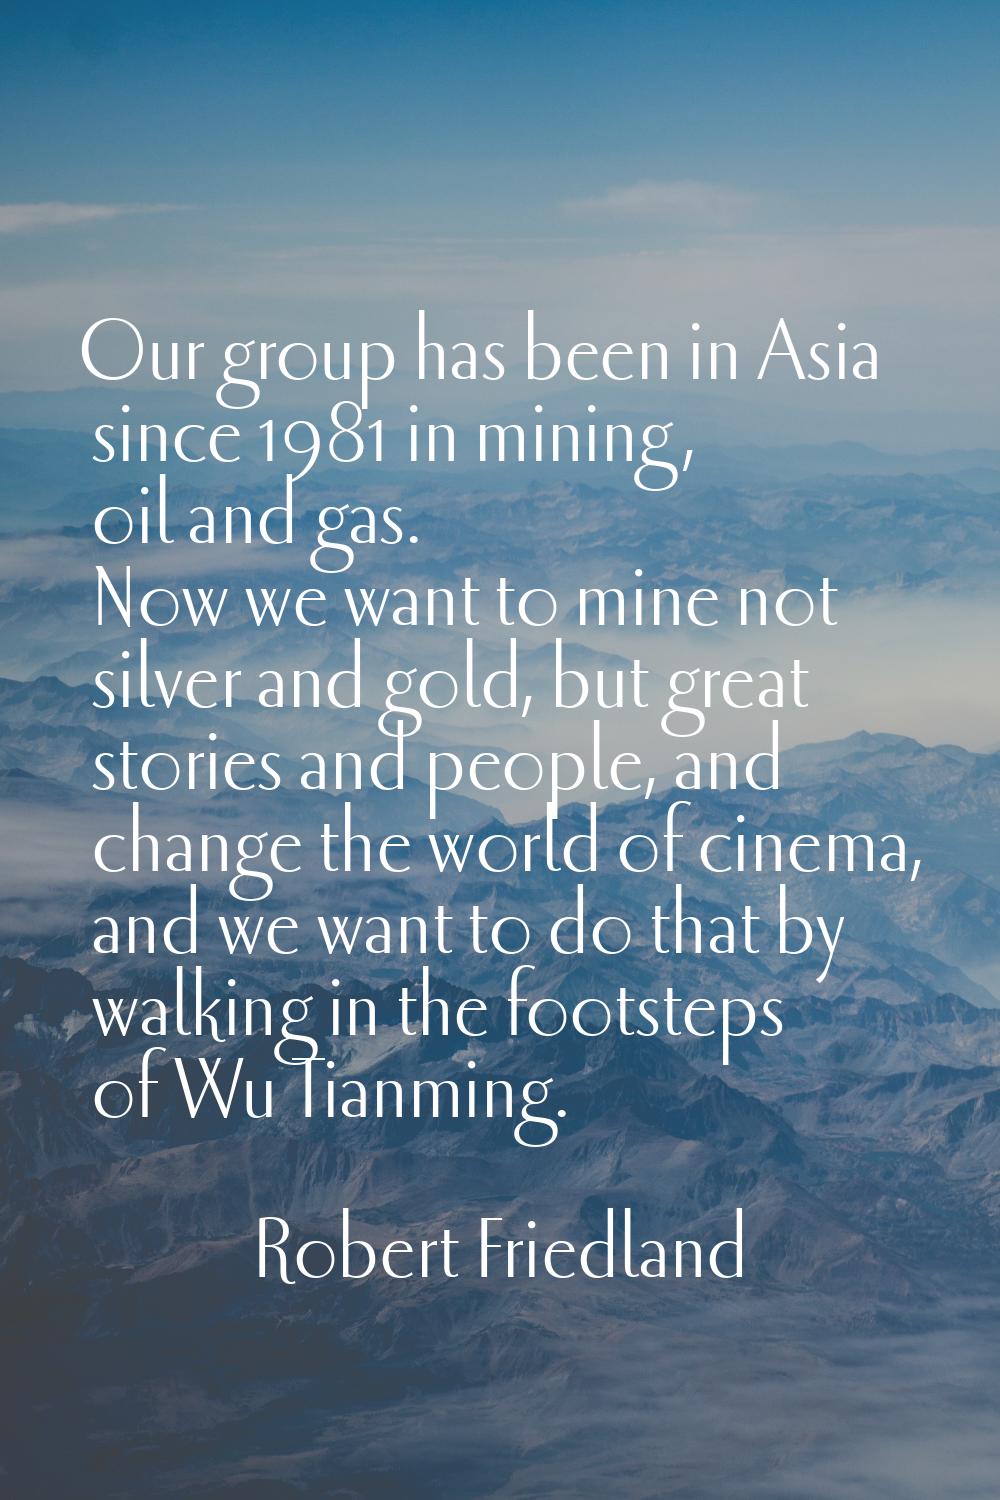 Our group has been in Asia since 1981 in mining, oil and gas. Now we want to mine not silver and go